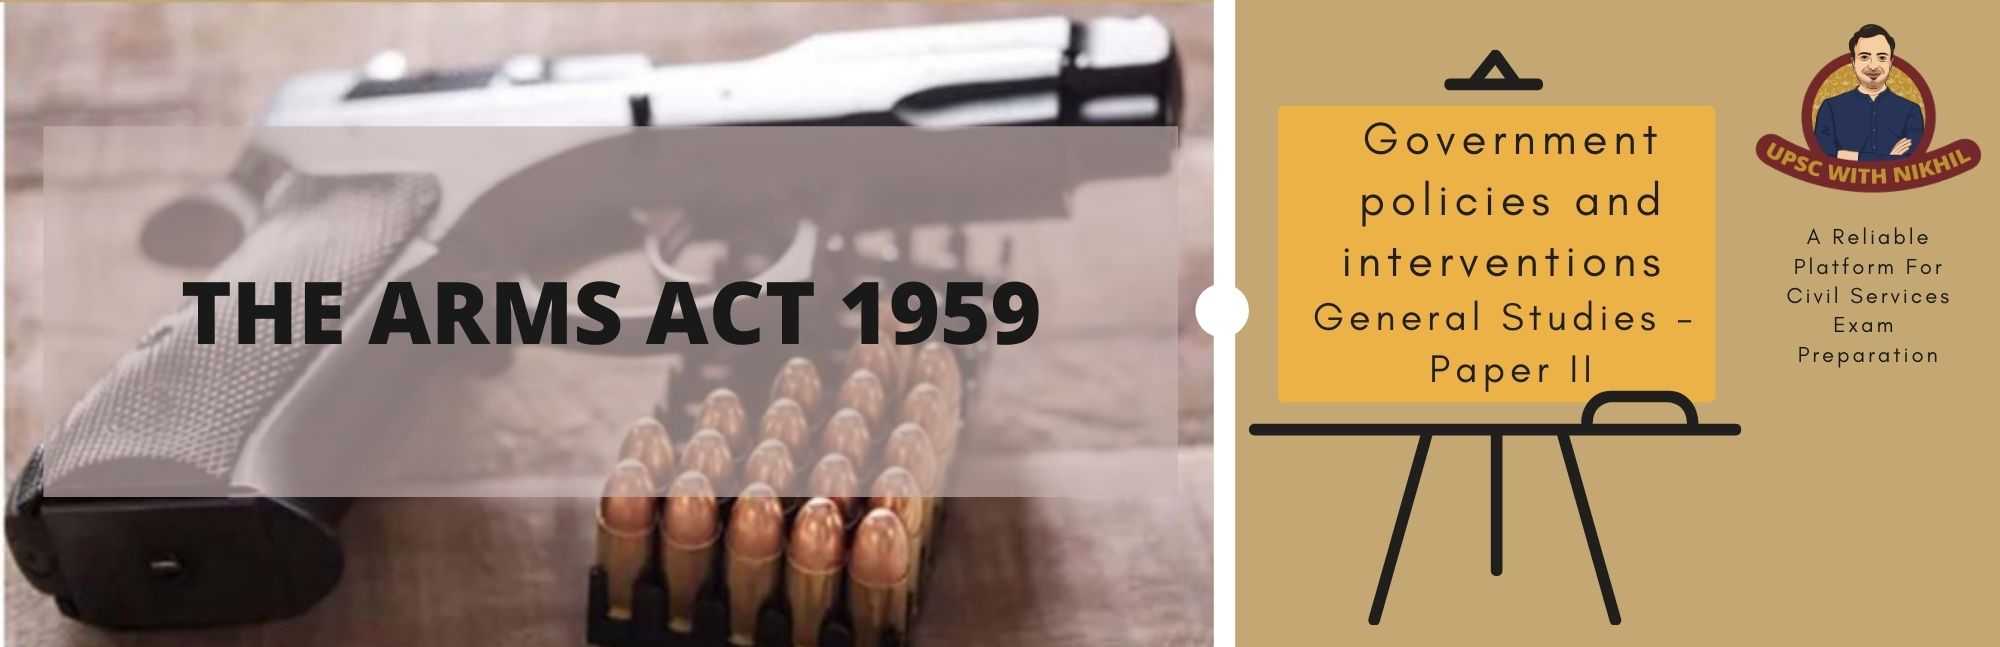 The Arms Act 1959